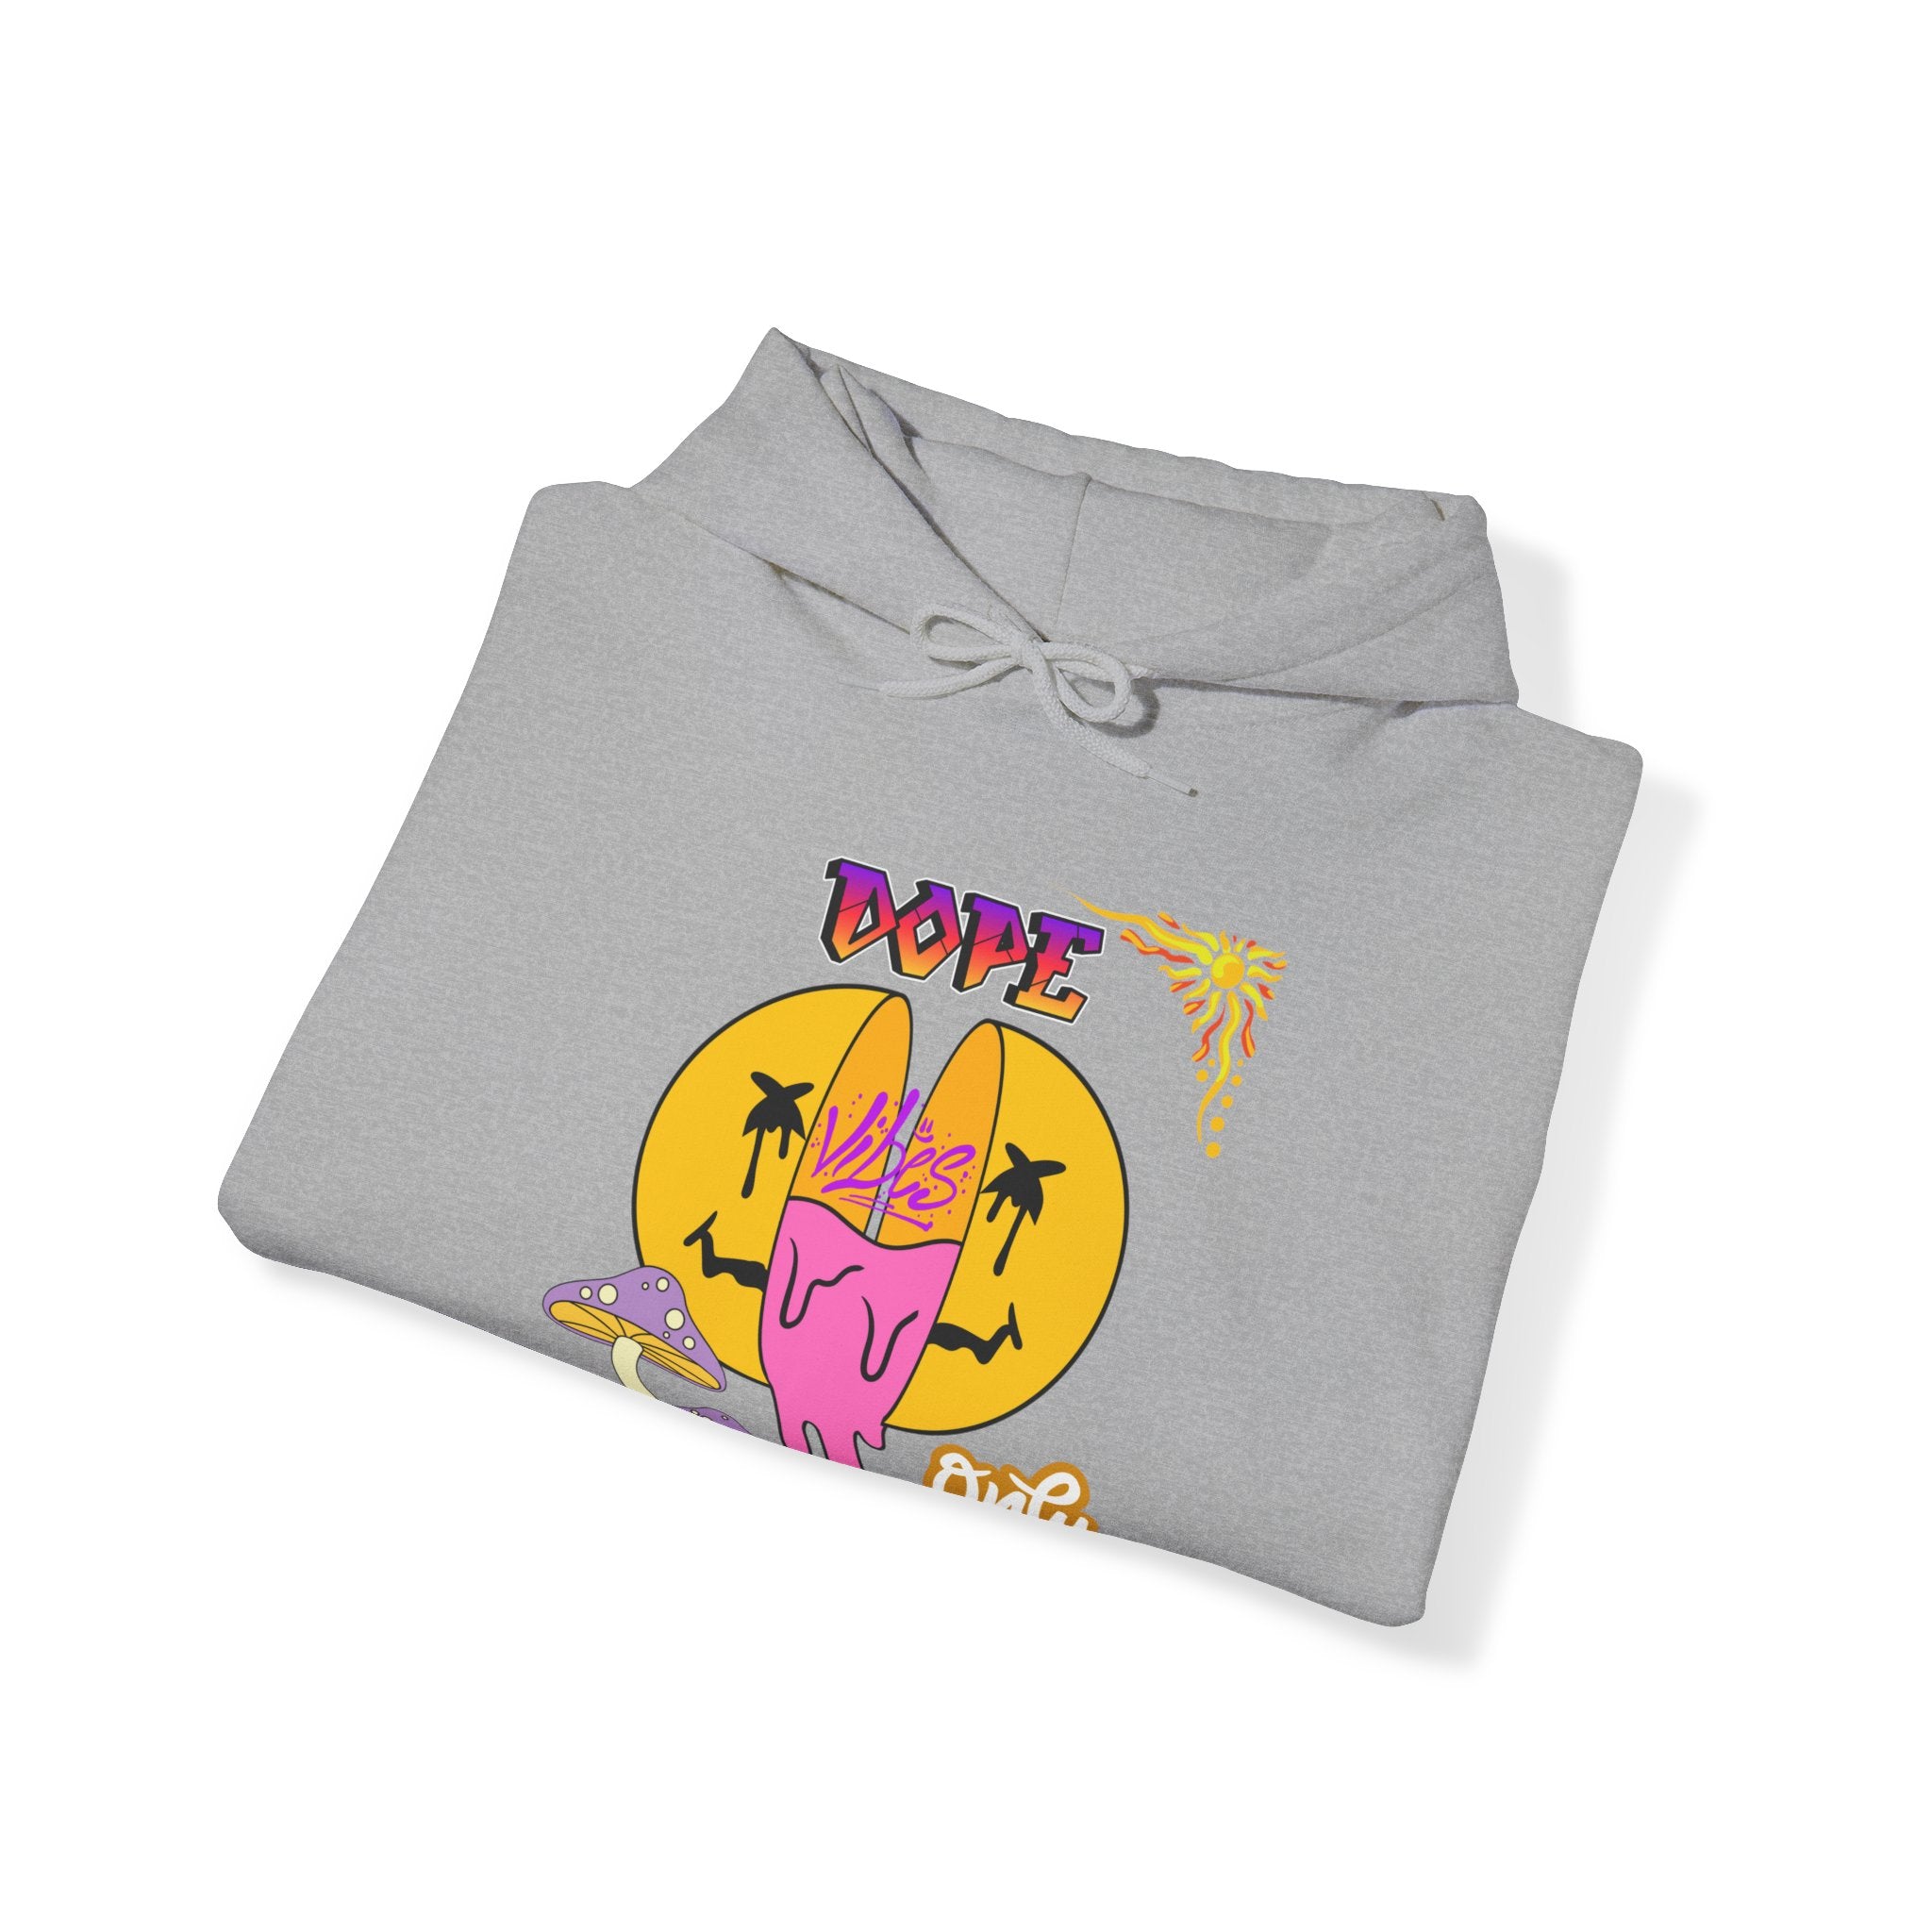 DOPE VIBES ONLY Hoodie